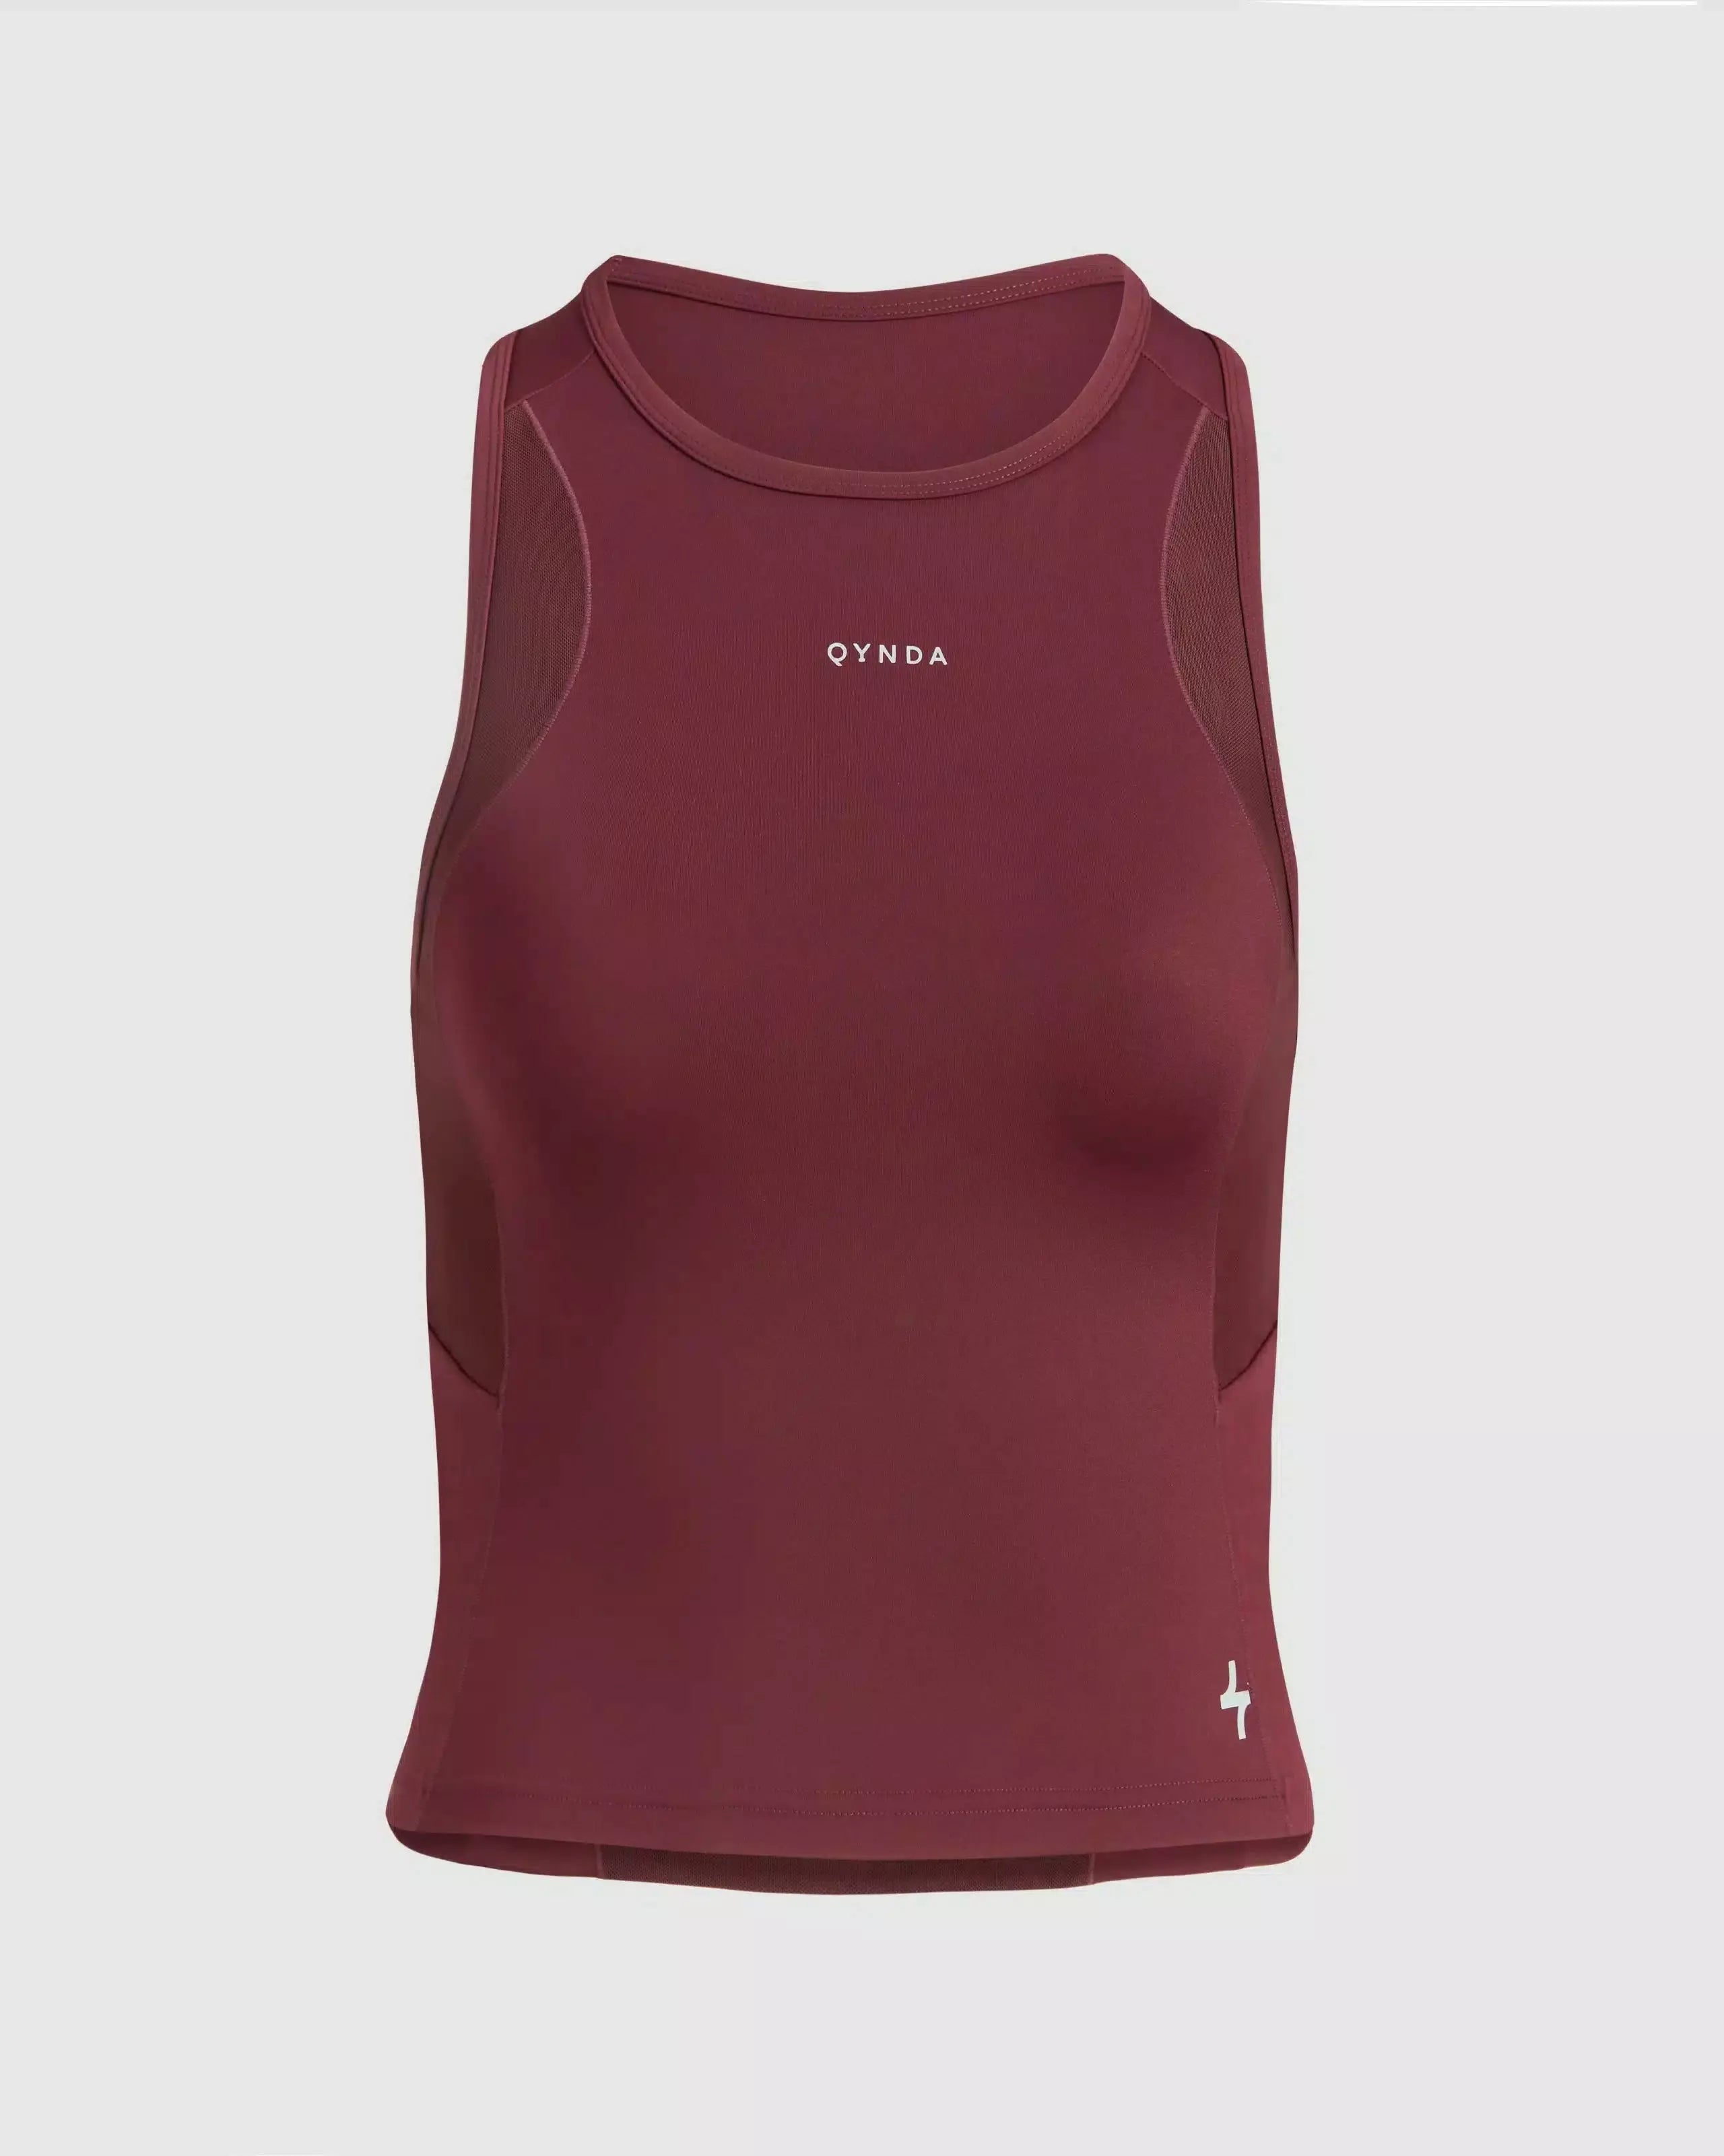 A maroon-colored women's sports tank top with a high neckline and a qynda logo on the chest.